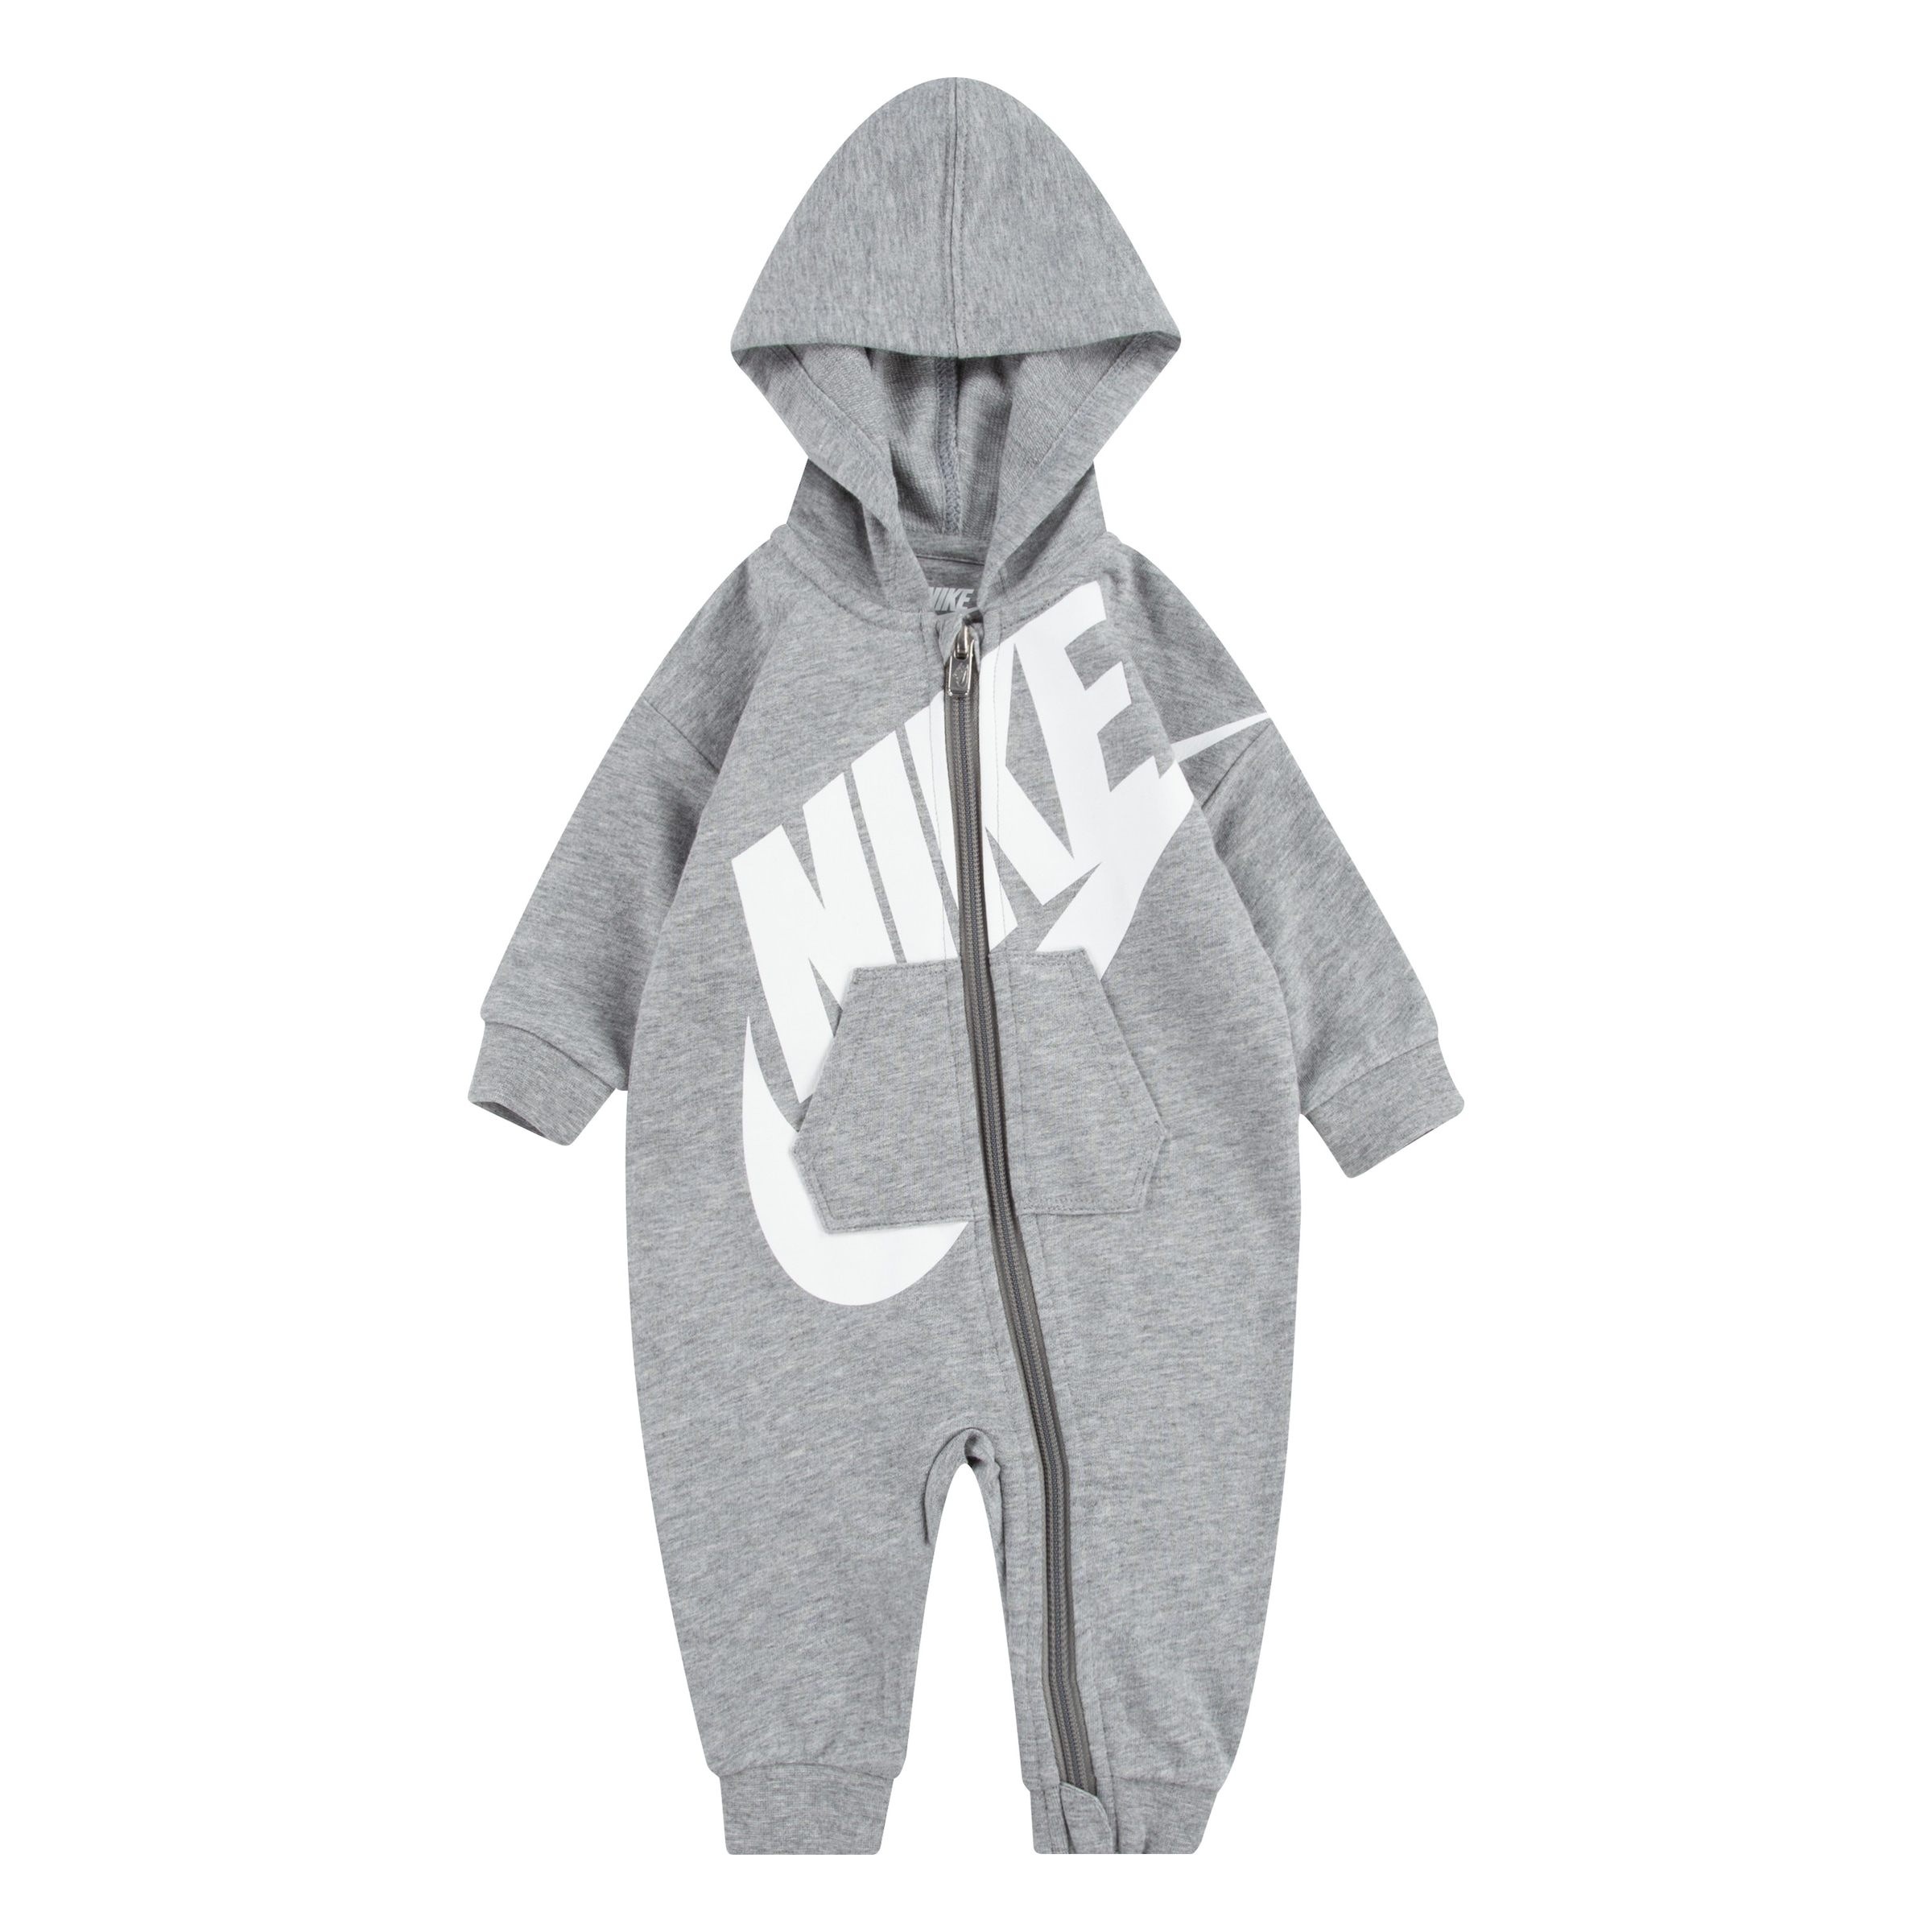 »NKN OTTO Jumpsuit PLAY Sportswear Nike DAY online ALL COVERALL« bei